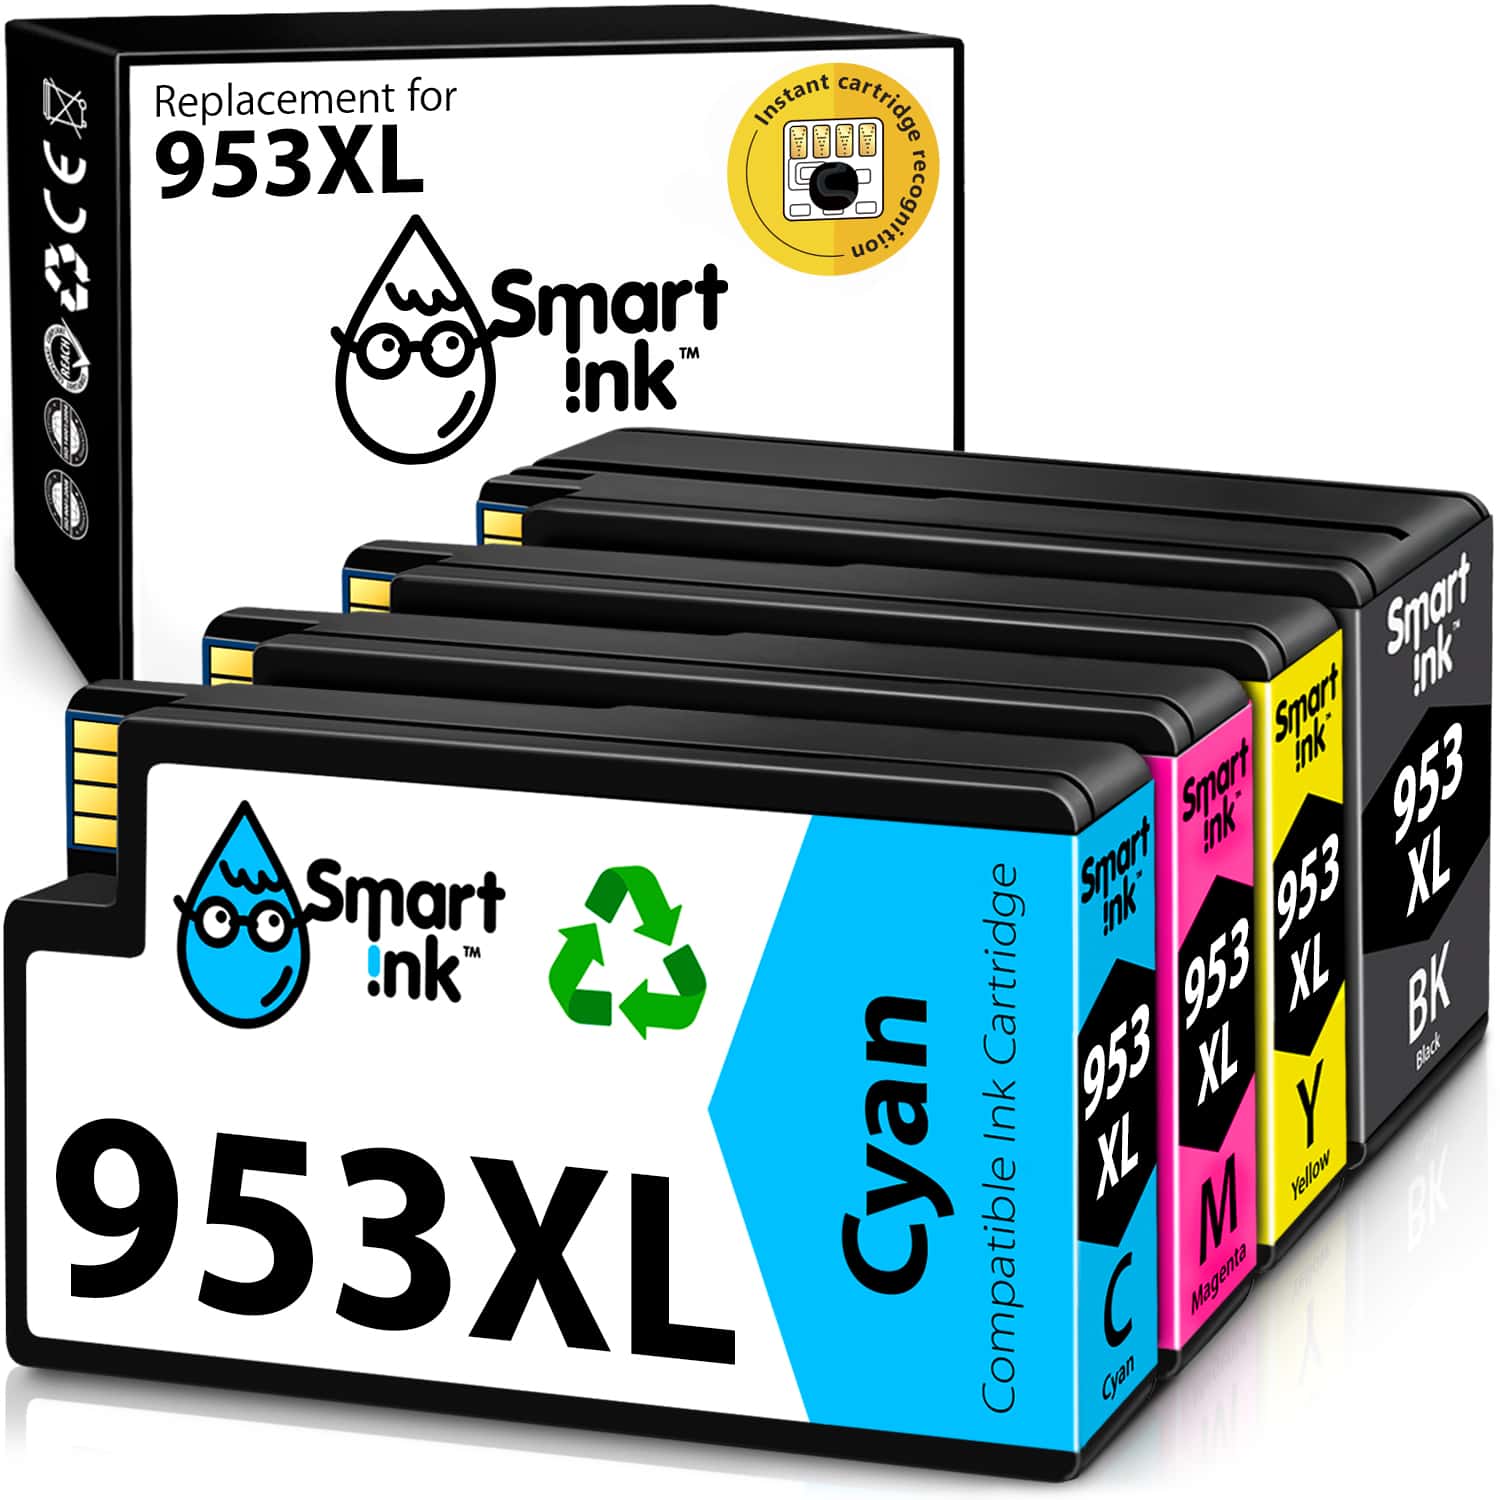 HP 953 XL (4 pack) Ink Cartridge Replacement - Buy Printer Cartridges in EU  at the best price